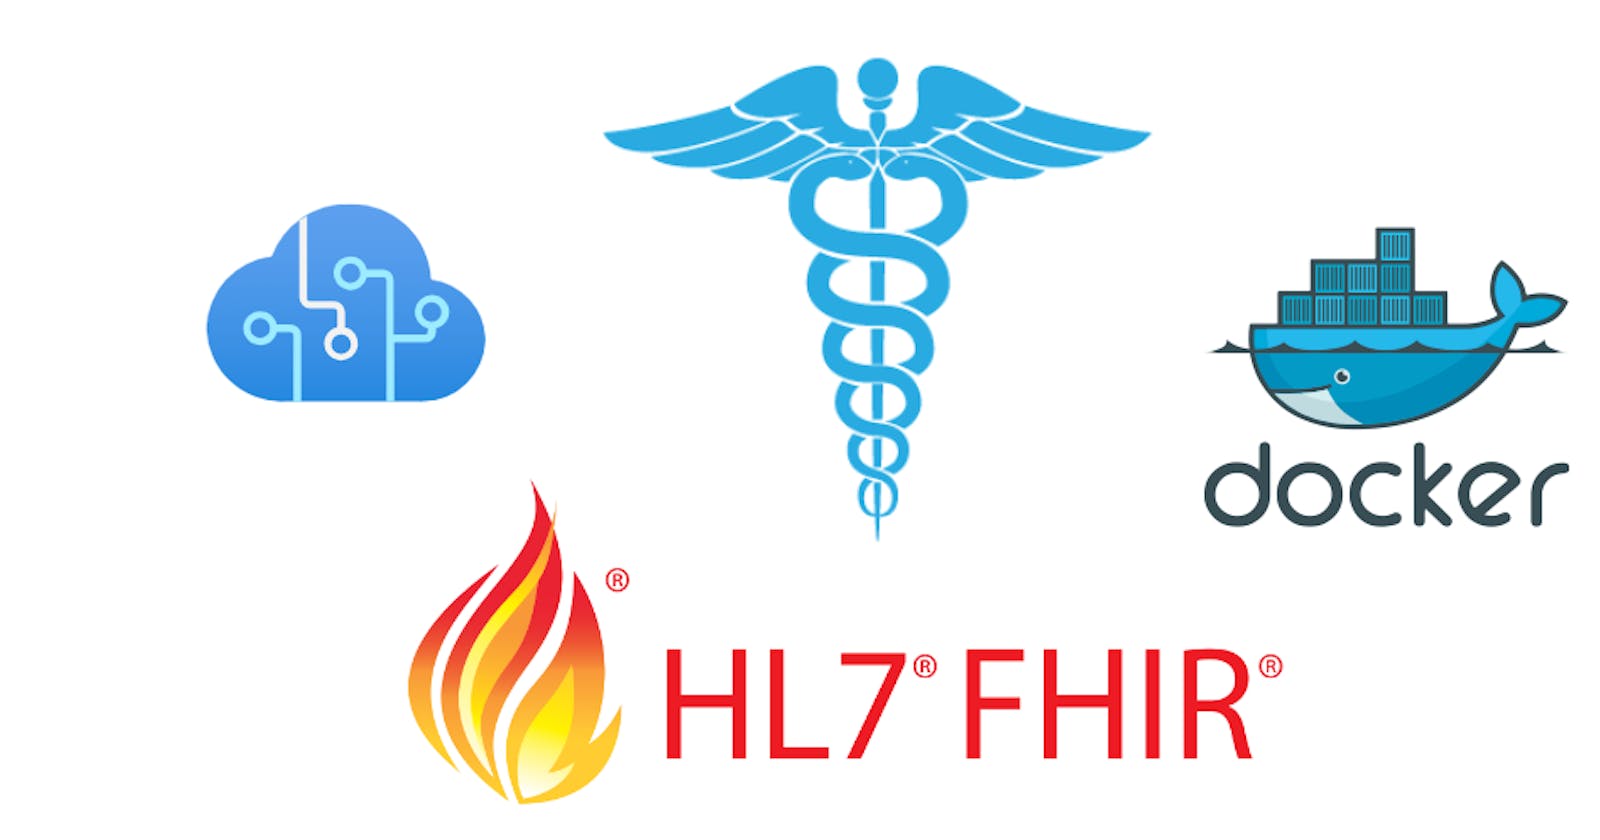 How to Setup Docker for Azure Cognitive Services to Obtain Healthcare Text Analytics and HL7 FHIR Data